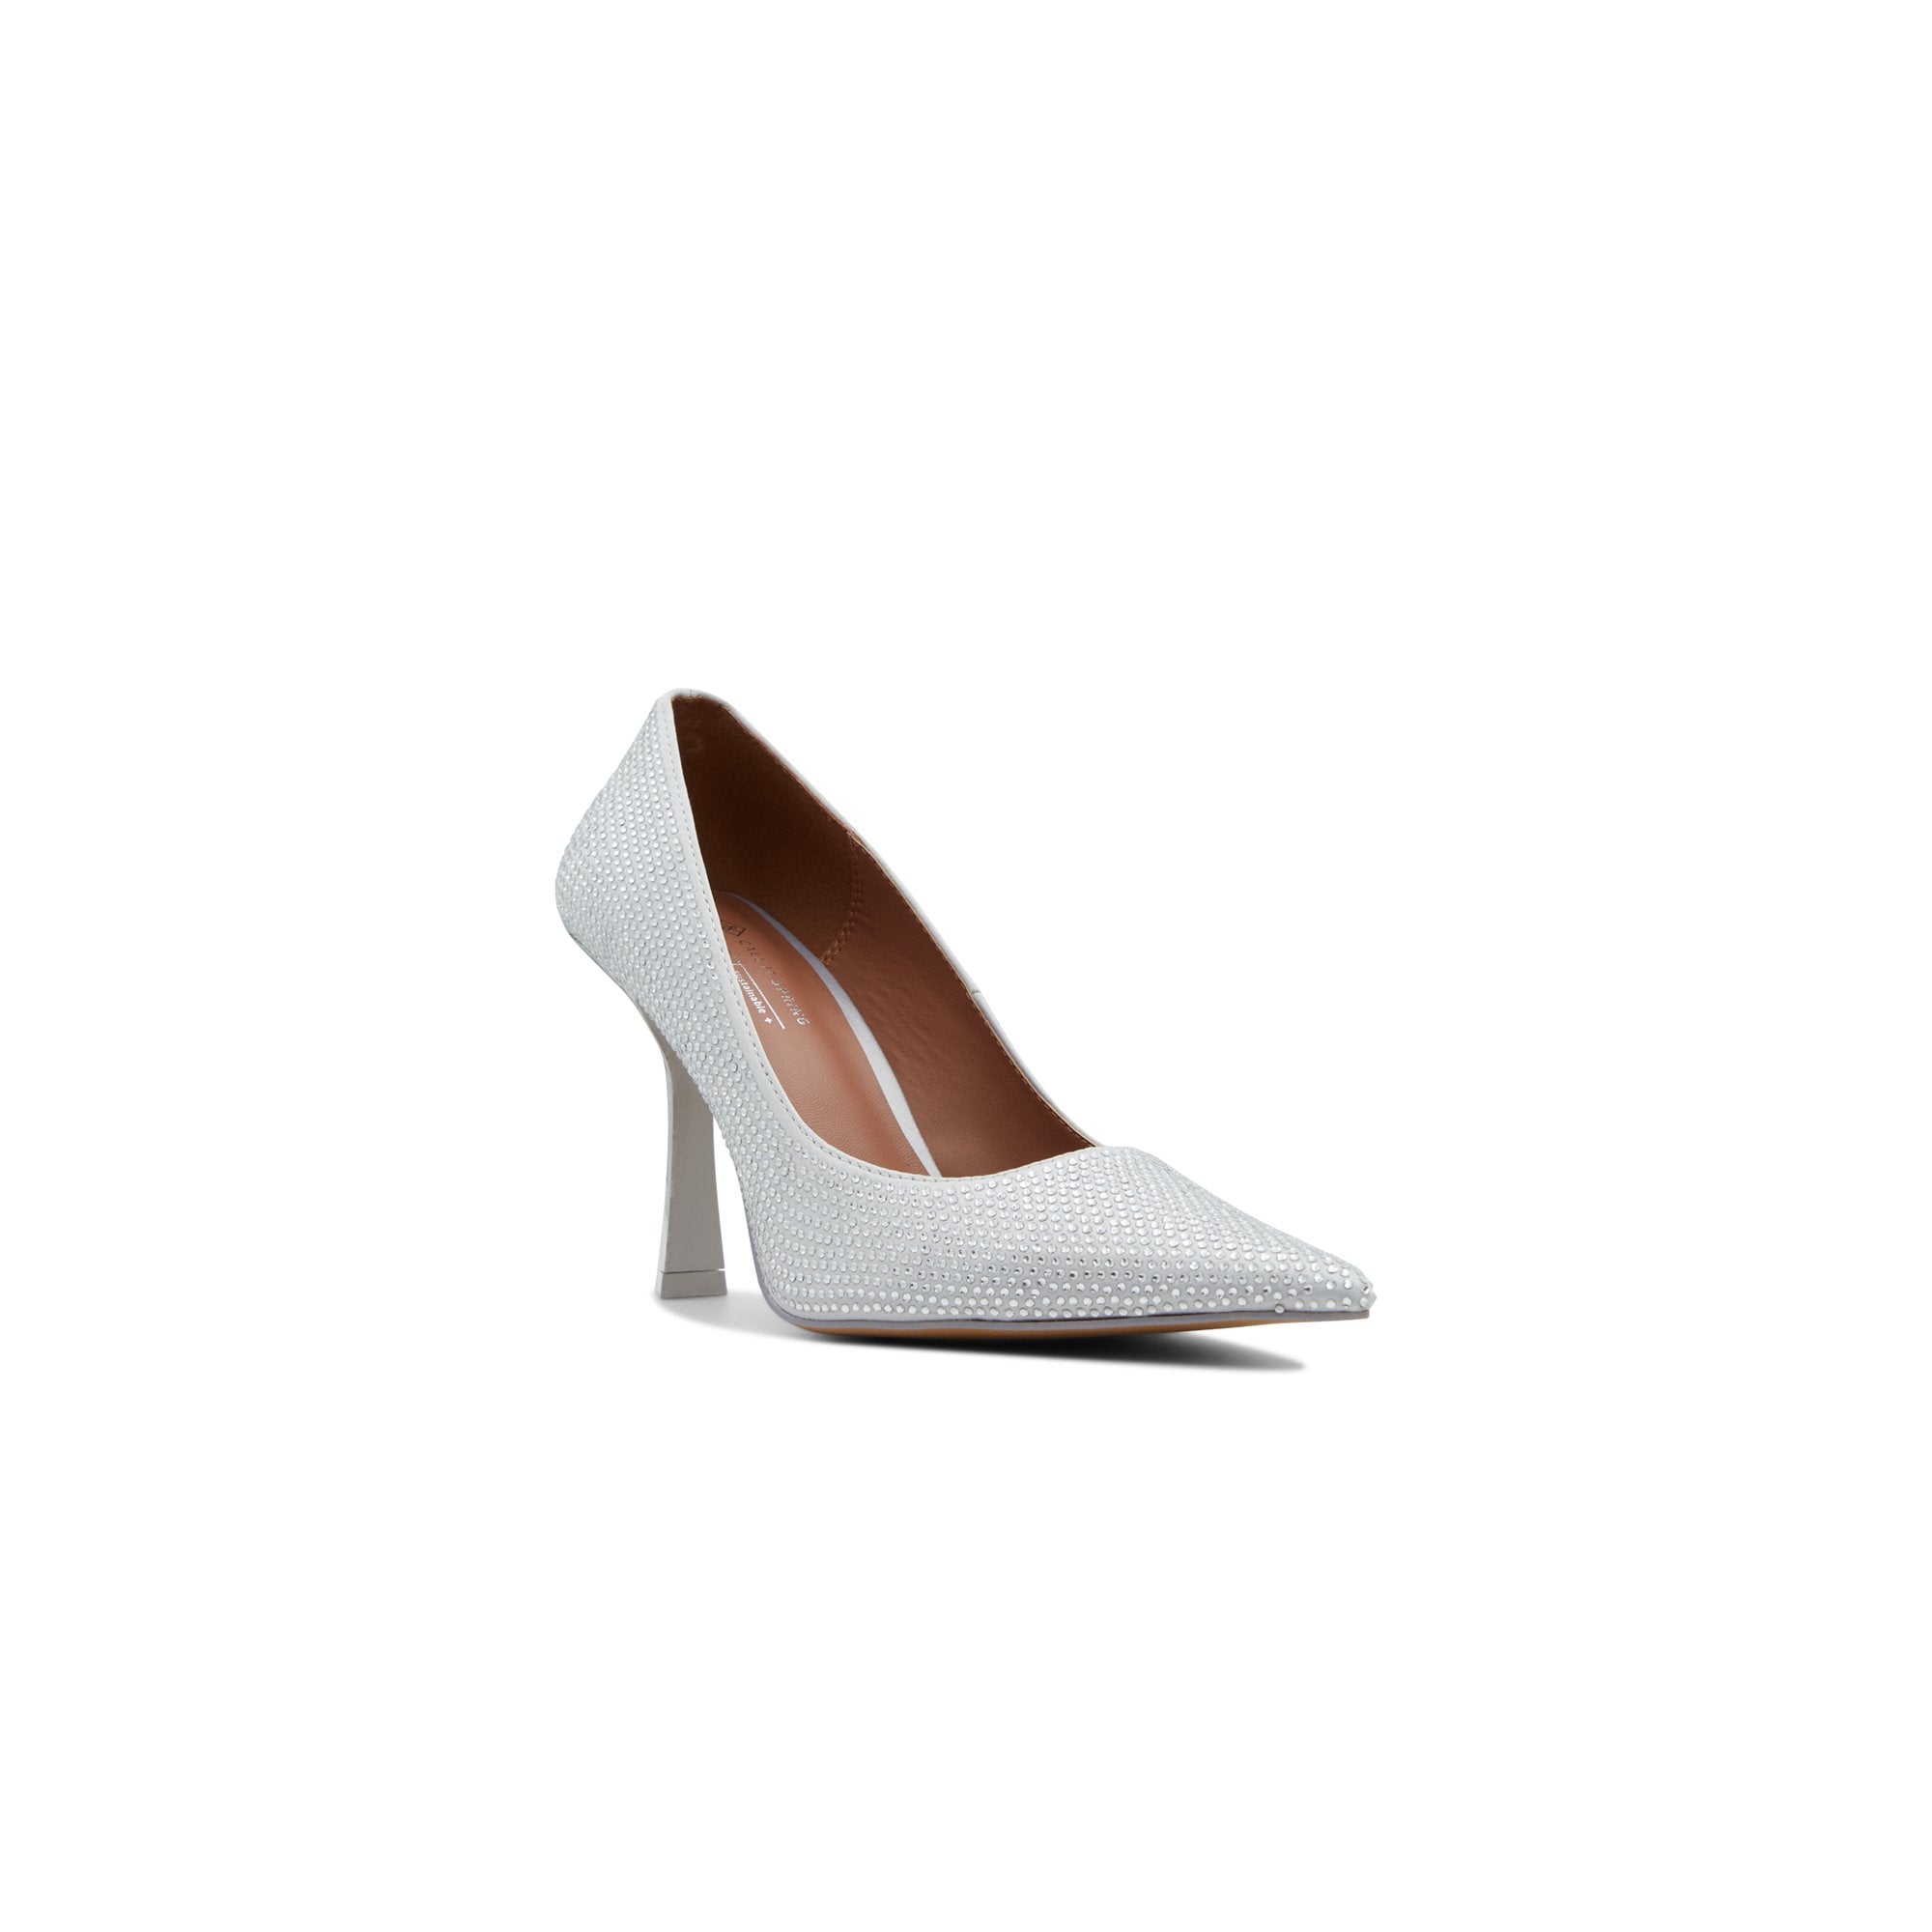 Toy leather pumps in white - Loewe | Mytheresa